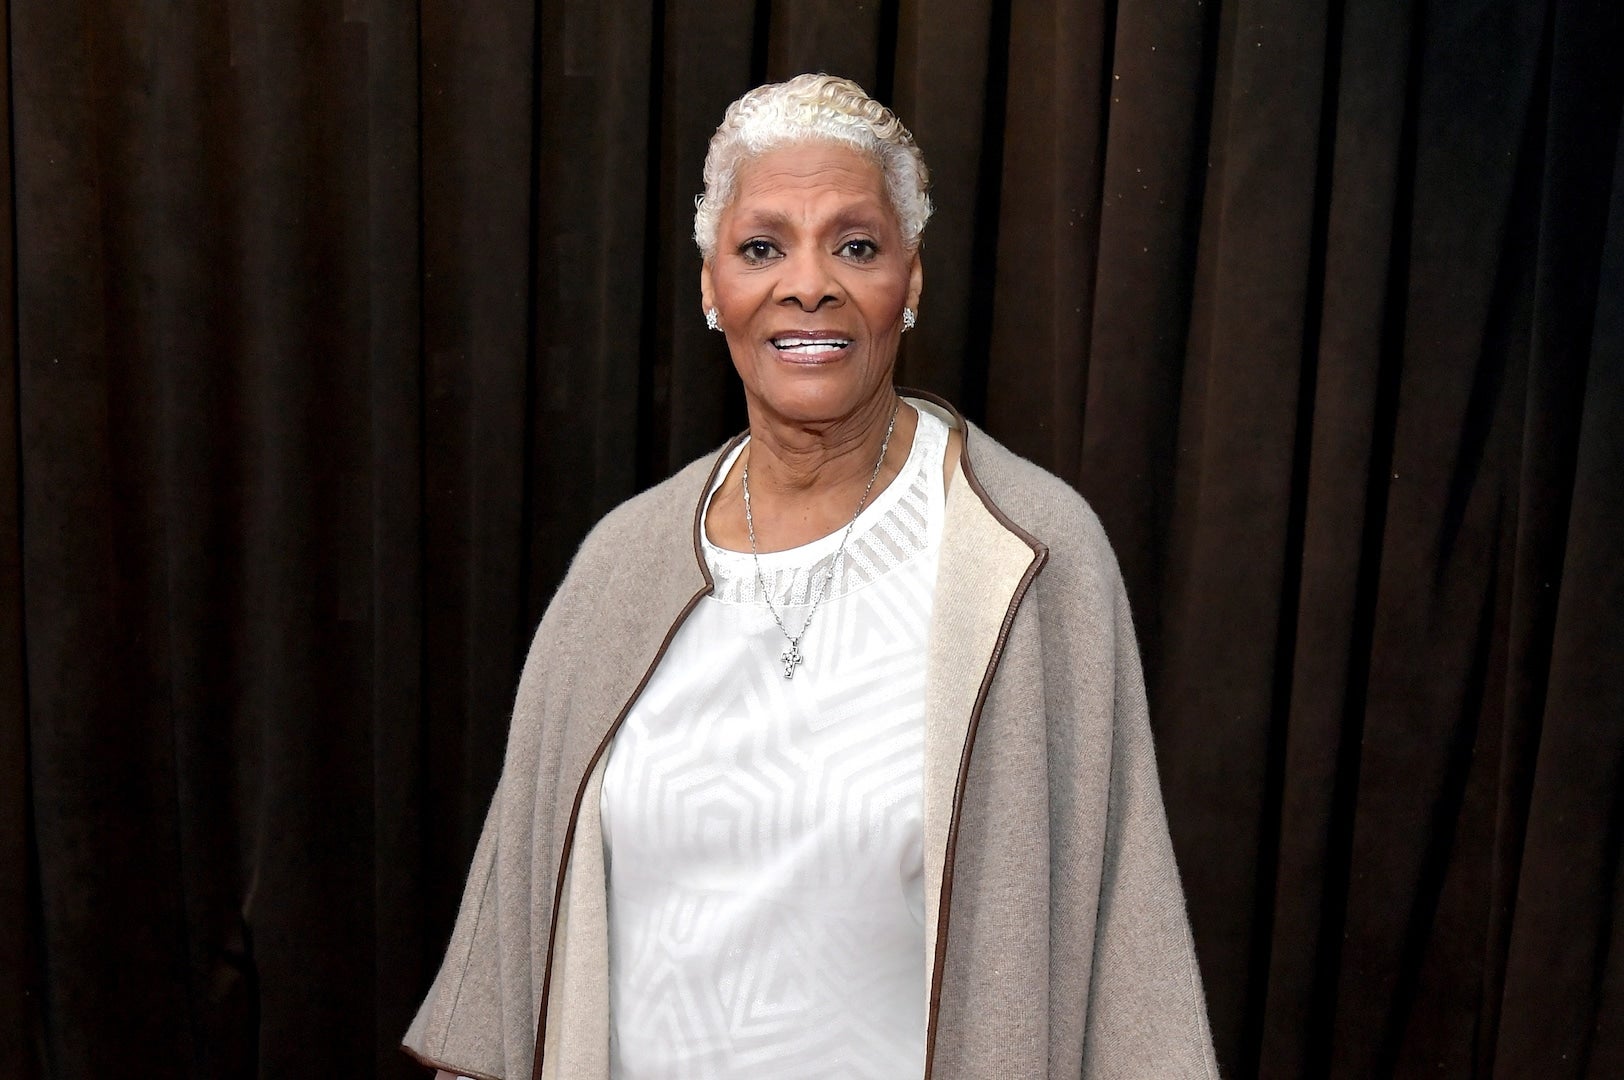 Dionne Warwick Will 'Never Forgive' Those Who Accused Her Sister of Molesting Whitney Houston